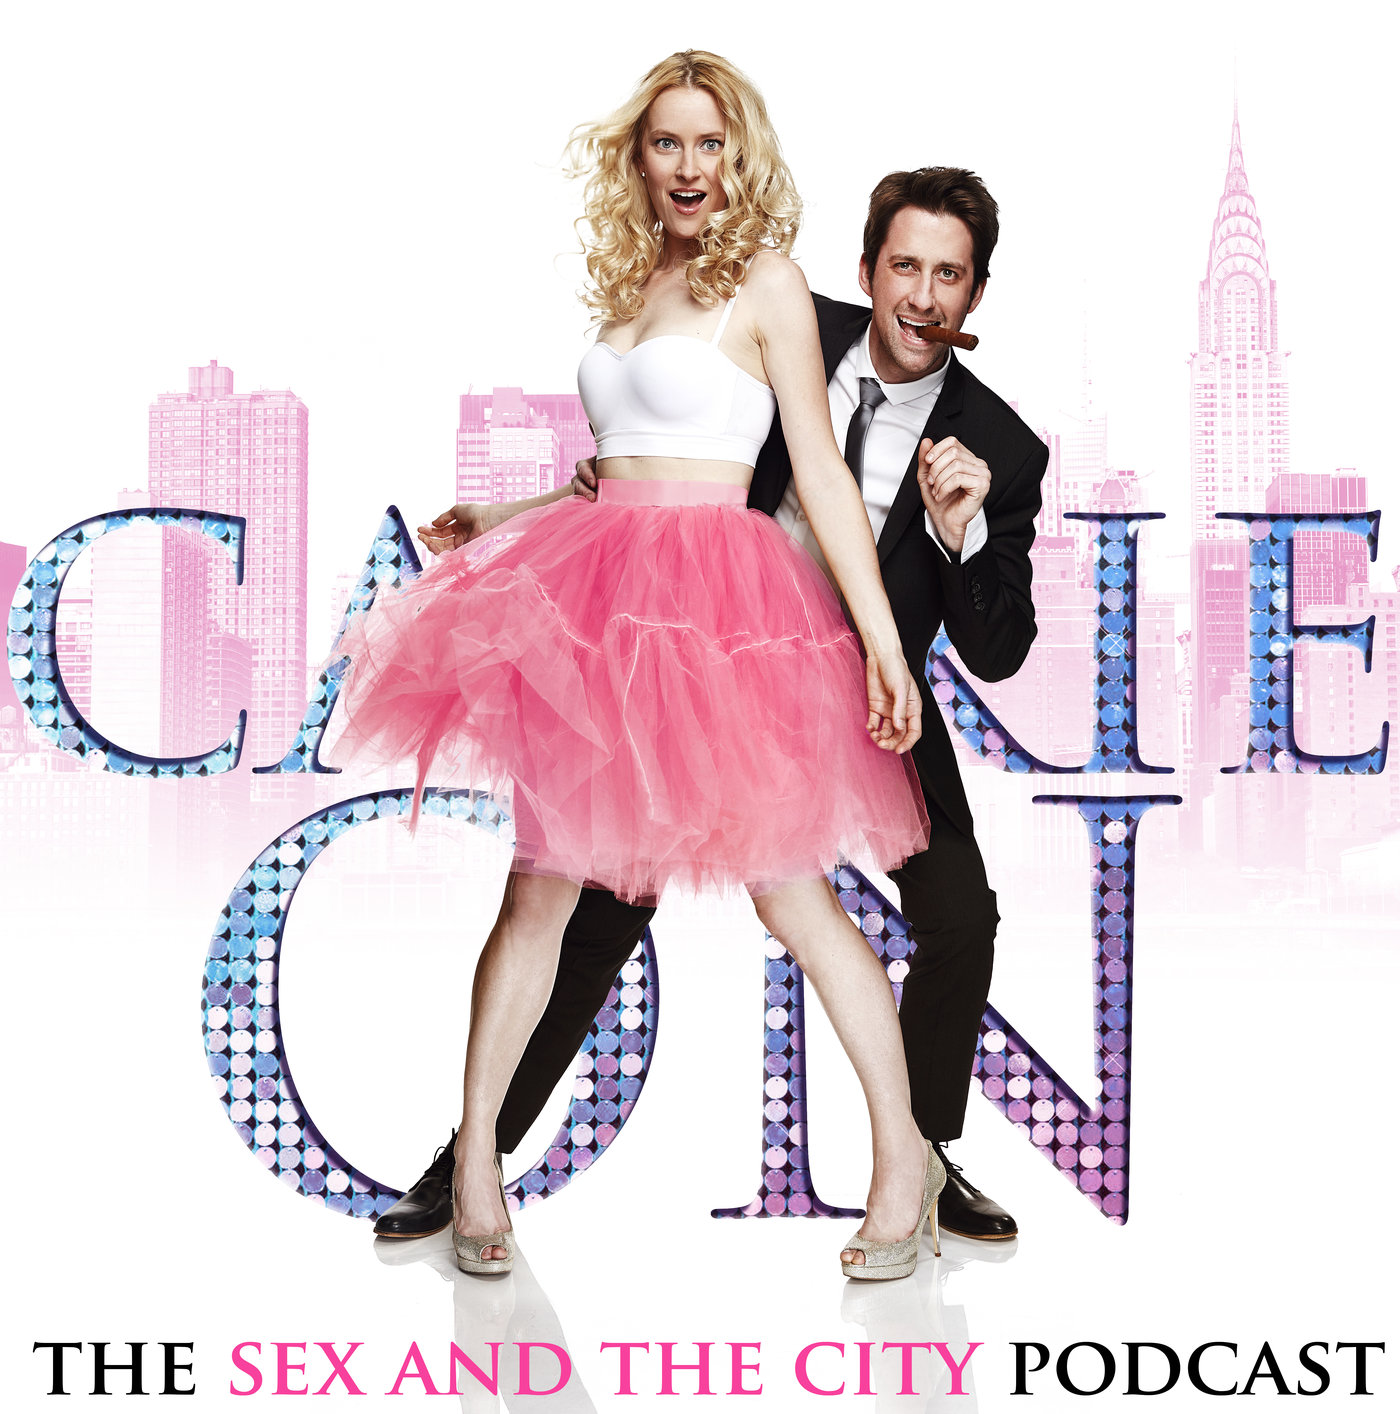 Carrie On The Sex And The City Podcast